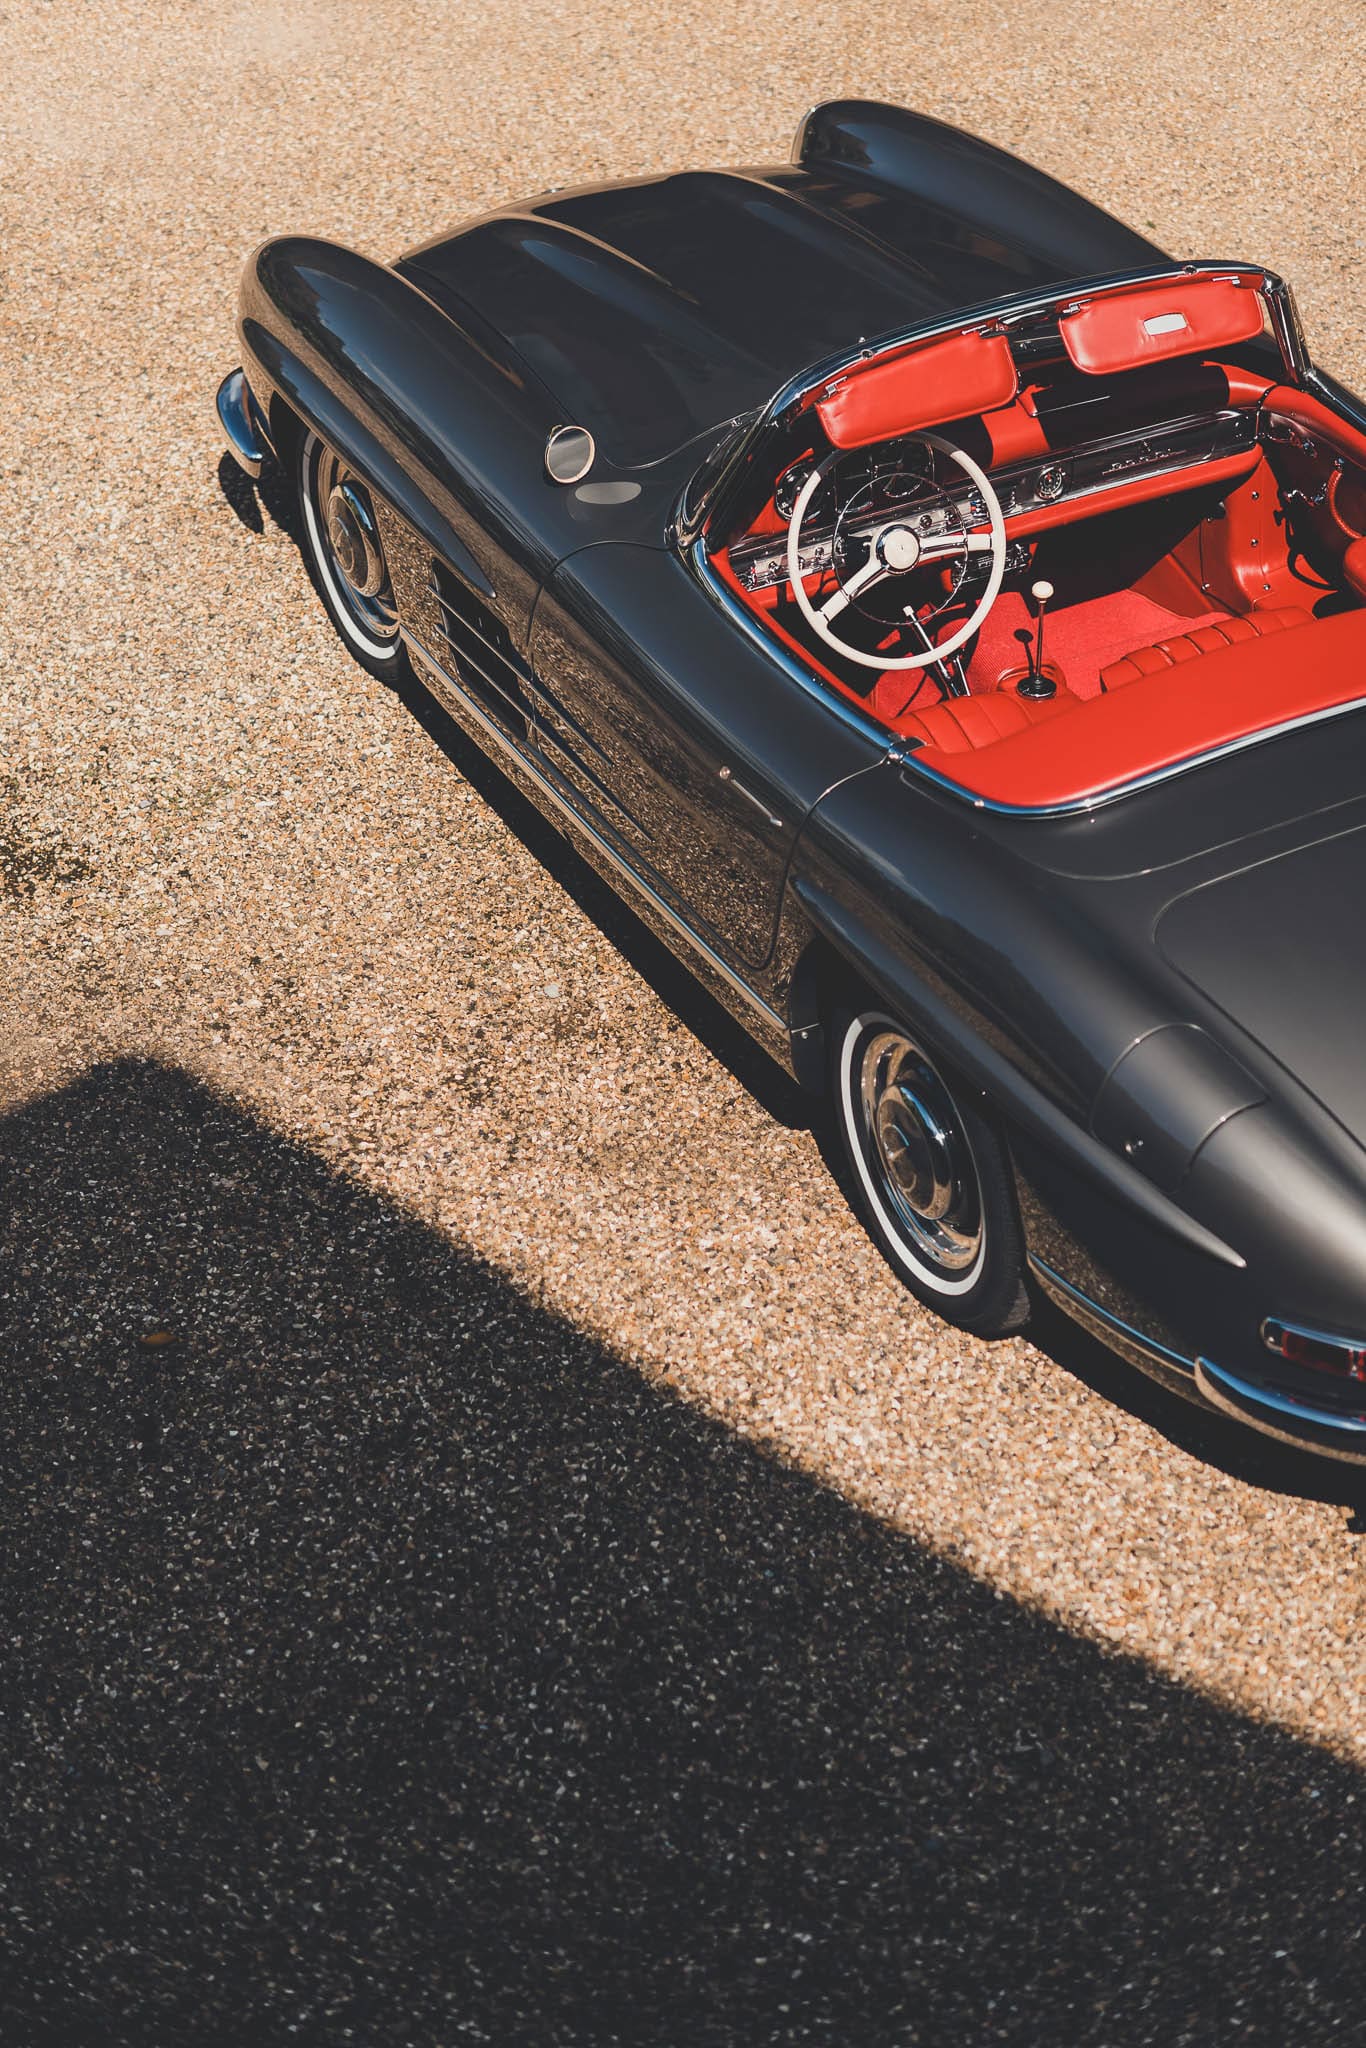 Mercedes-Benz 300 SL Roadster, For sale: <strong>Mercedes-Benz 300 SL Roadster uit &#8217;57</strong>